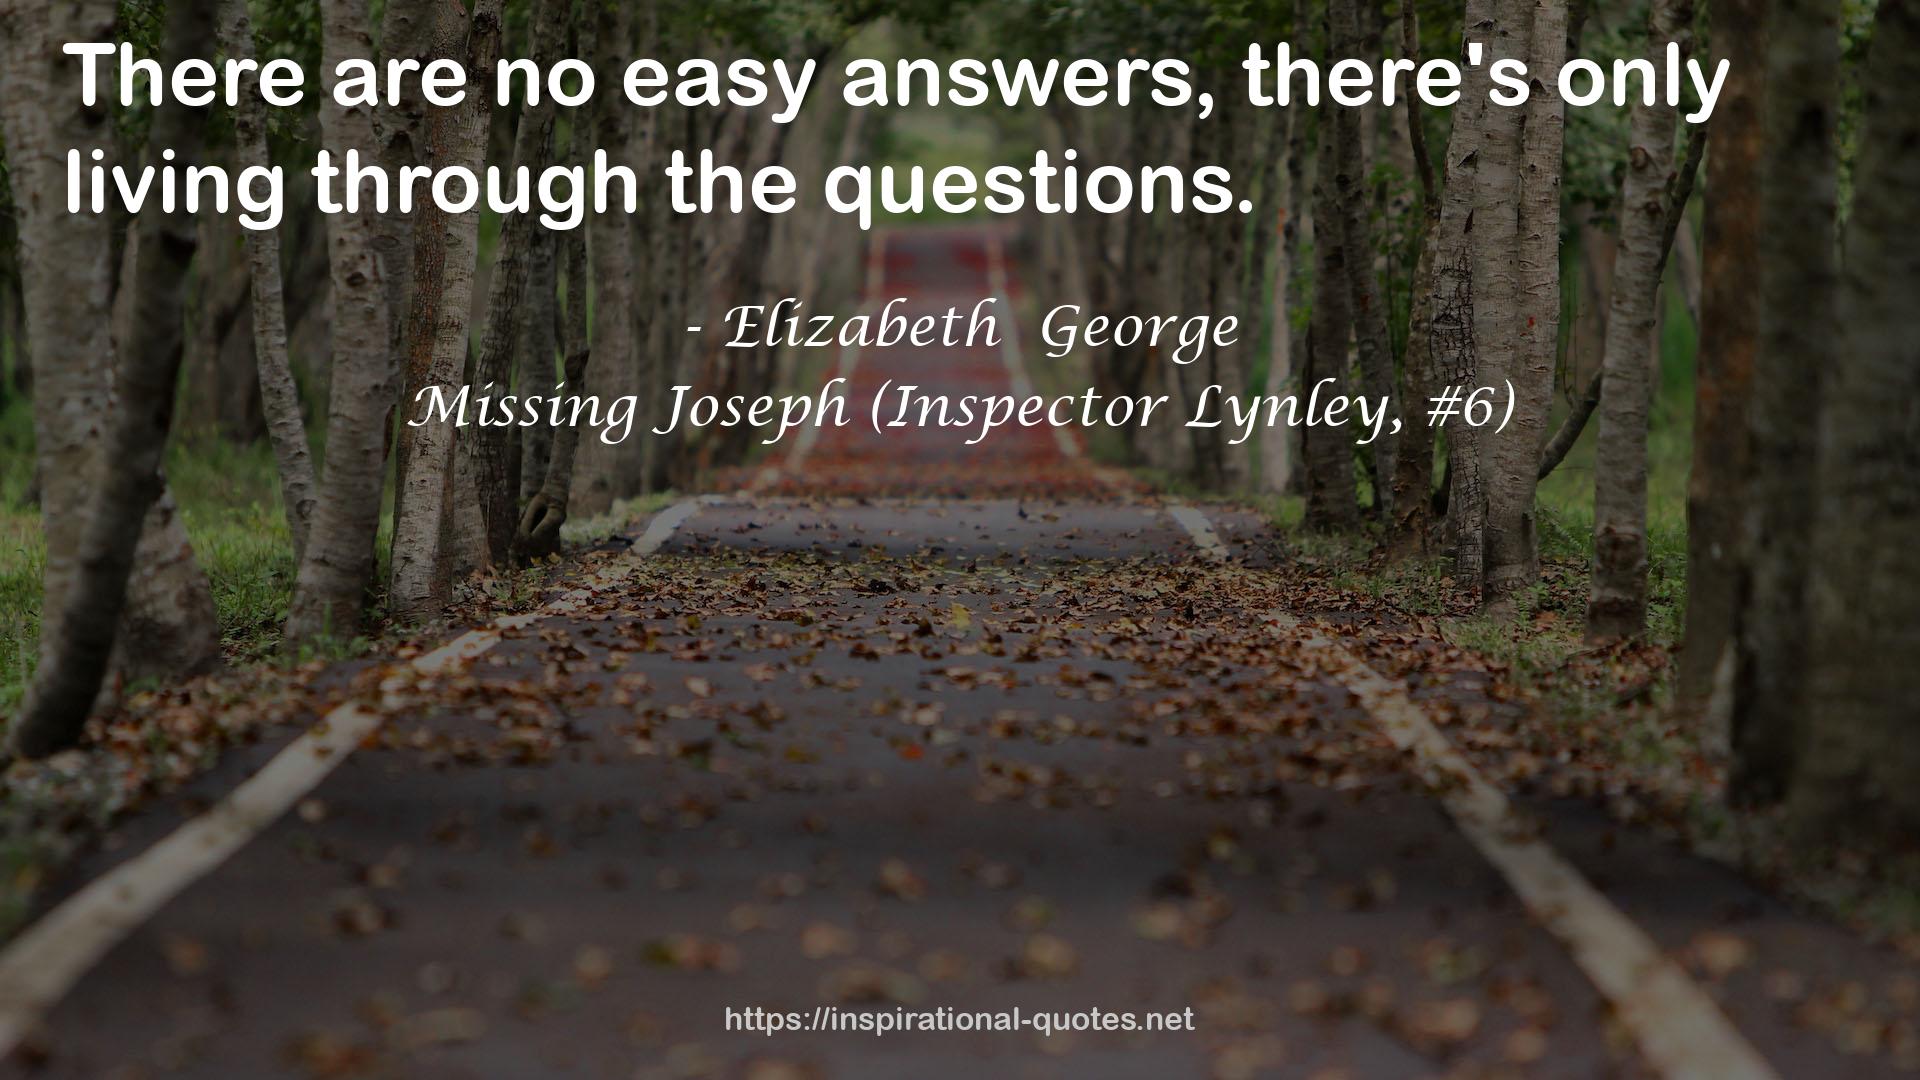 Missing Joseph (Inspector Lynley, #6) QUOTES